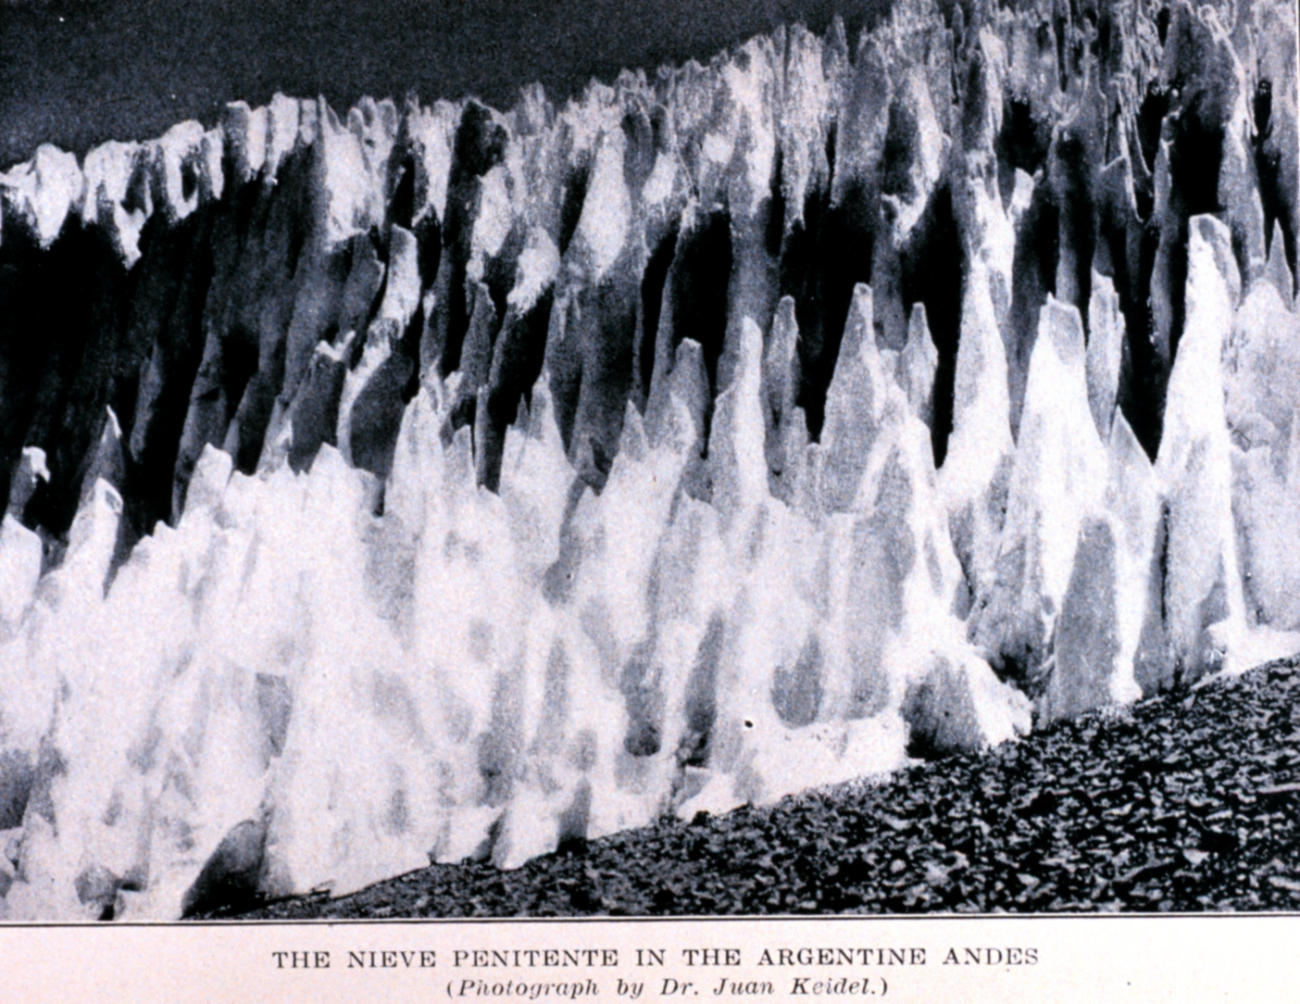 The Nieve Penitente in the Argentine Andes